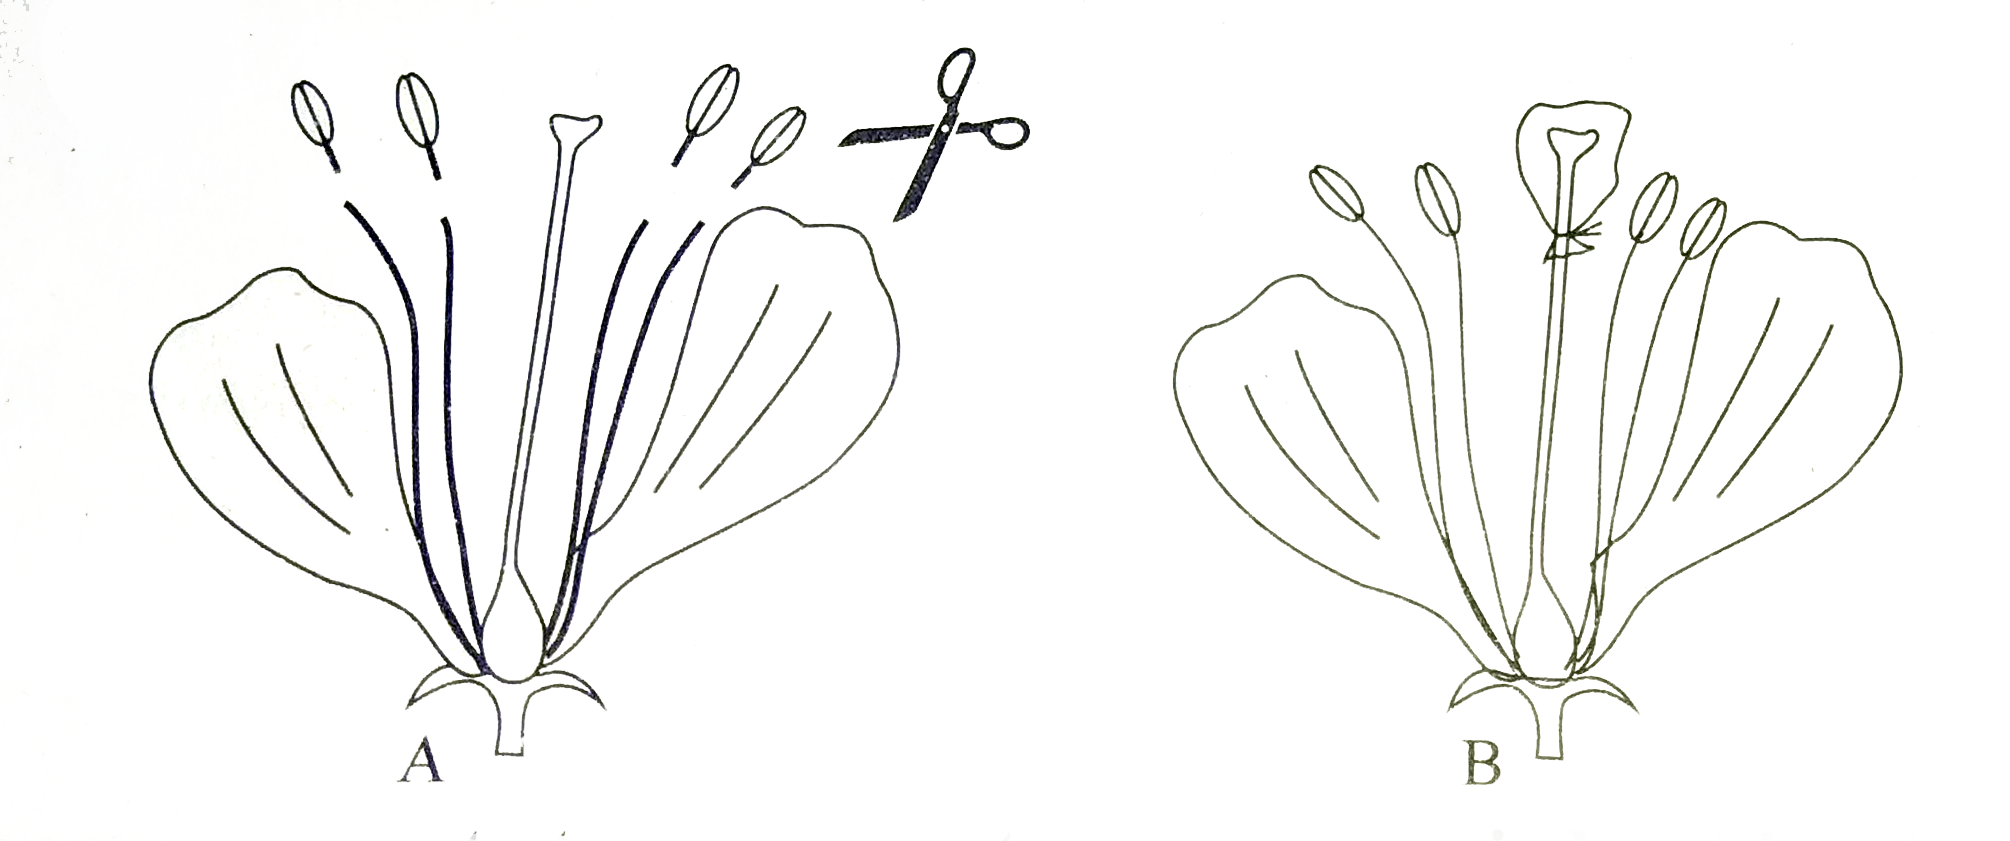 The above picture represents two different process carried out by the plant breeders. Name the process A and B and define them.